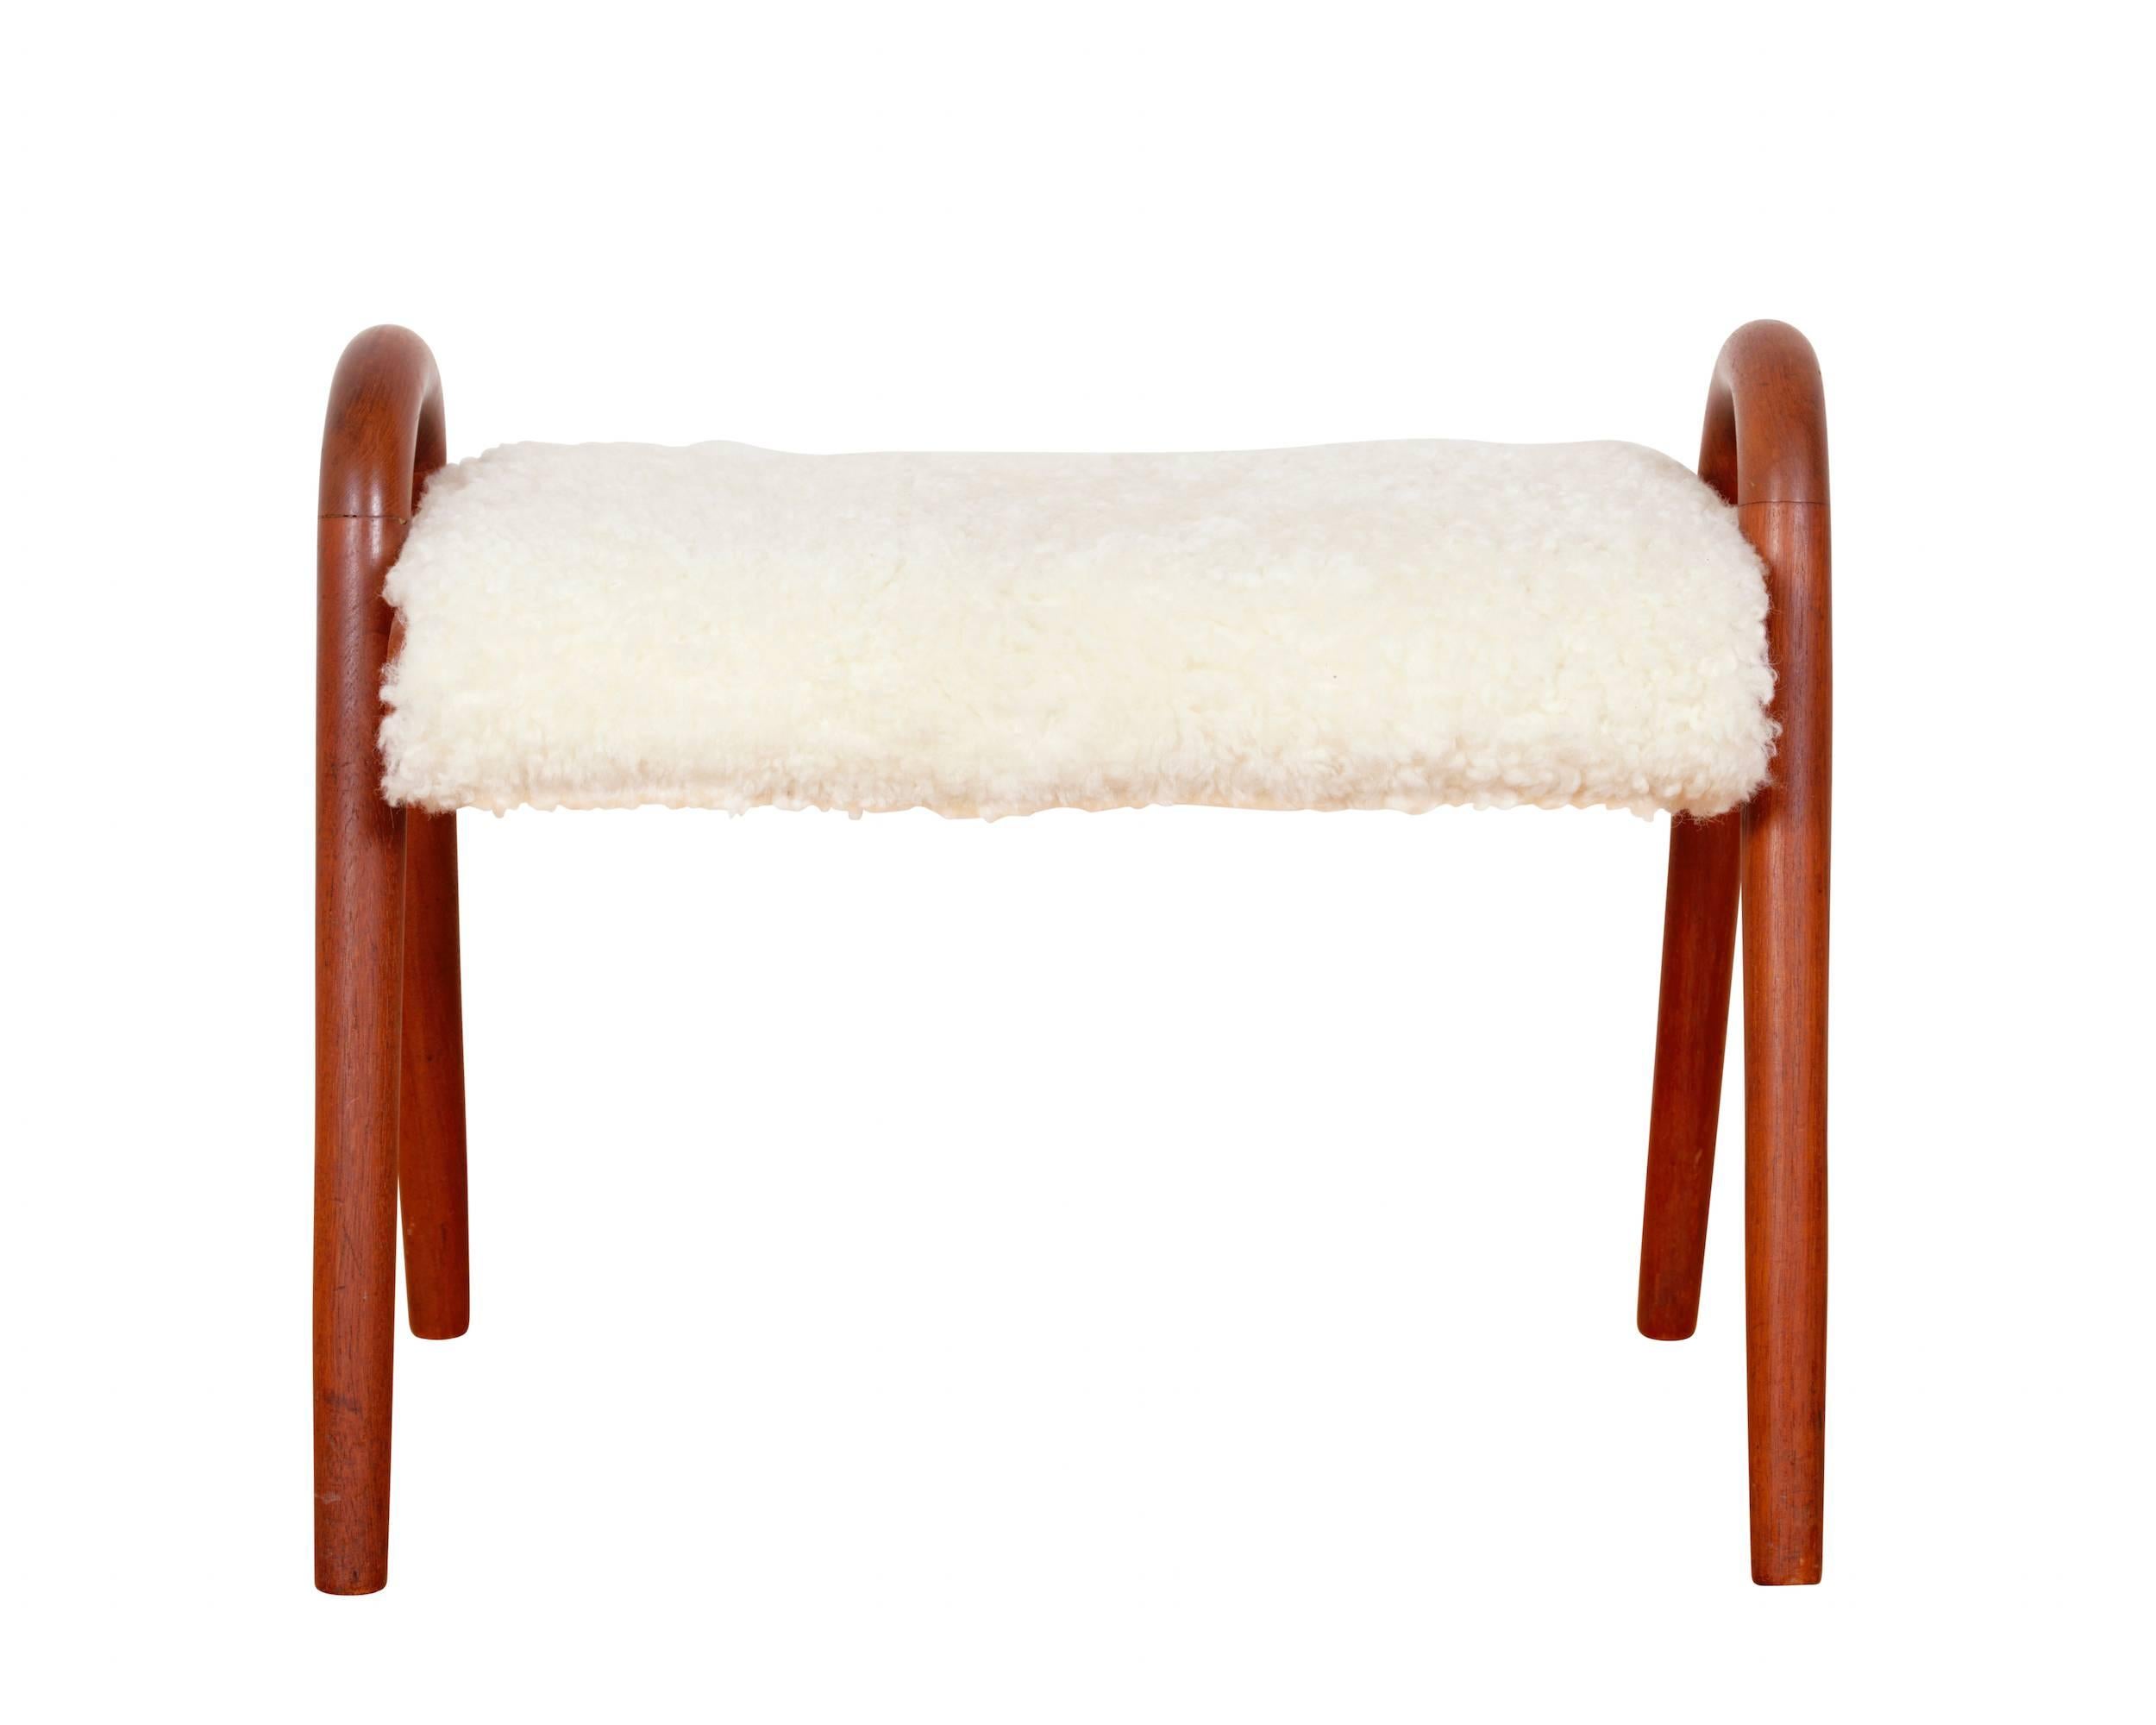 A pair of teak stools, upholstered with sheepskin.
Manufactured by Rud Rasmussen.